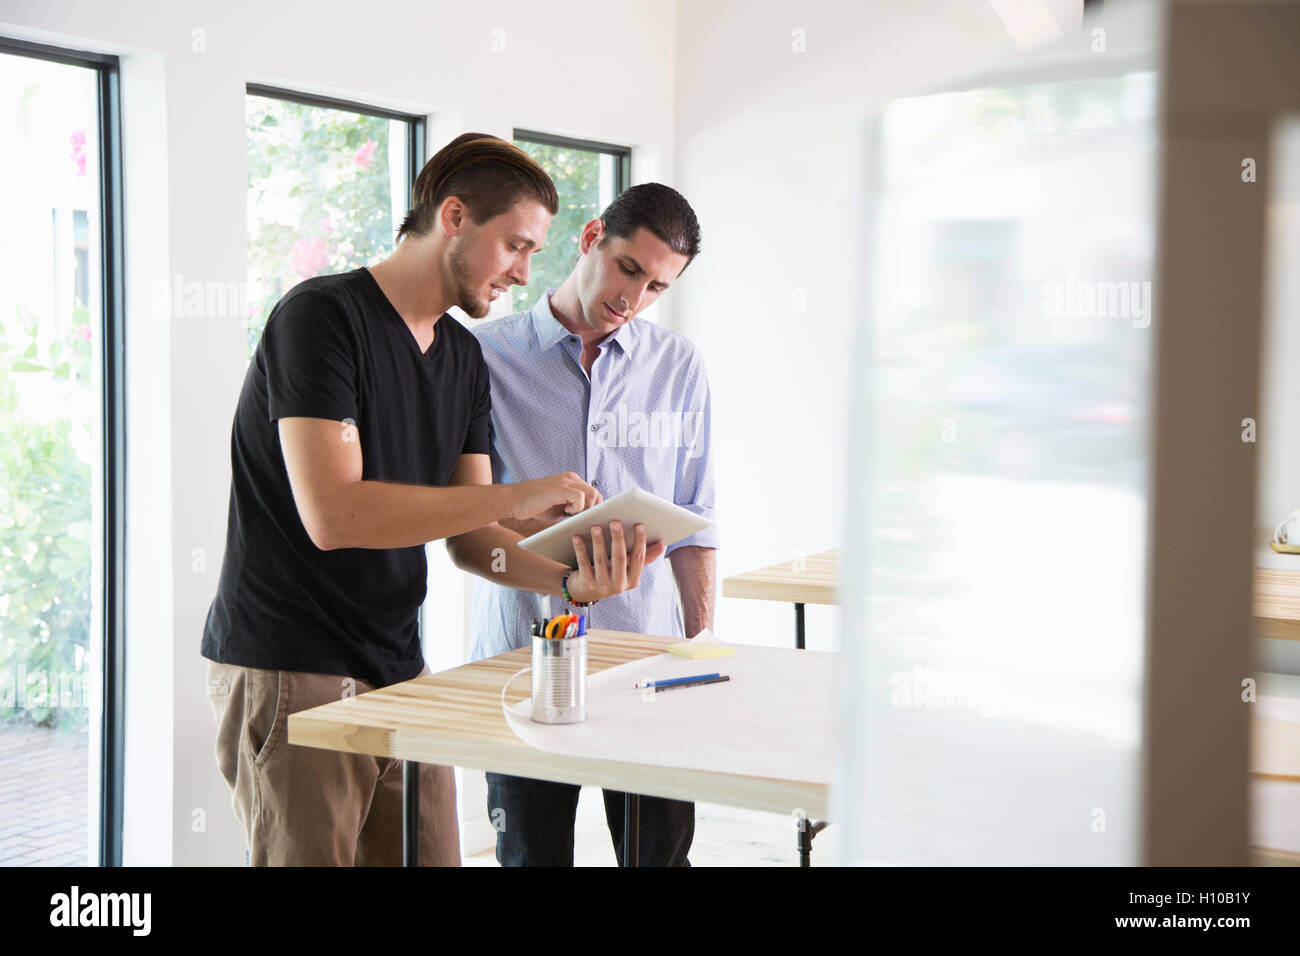 Two male office workers discuss ideas in a modern office Stock Photo